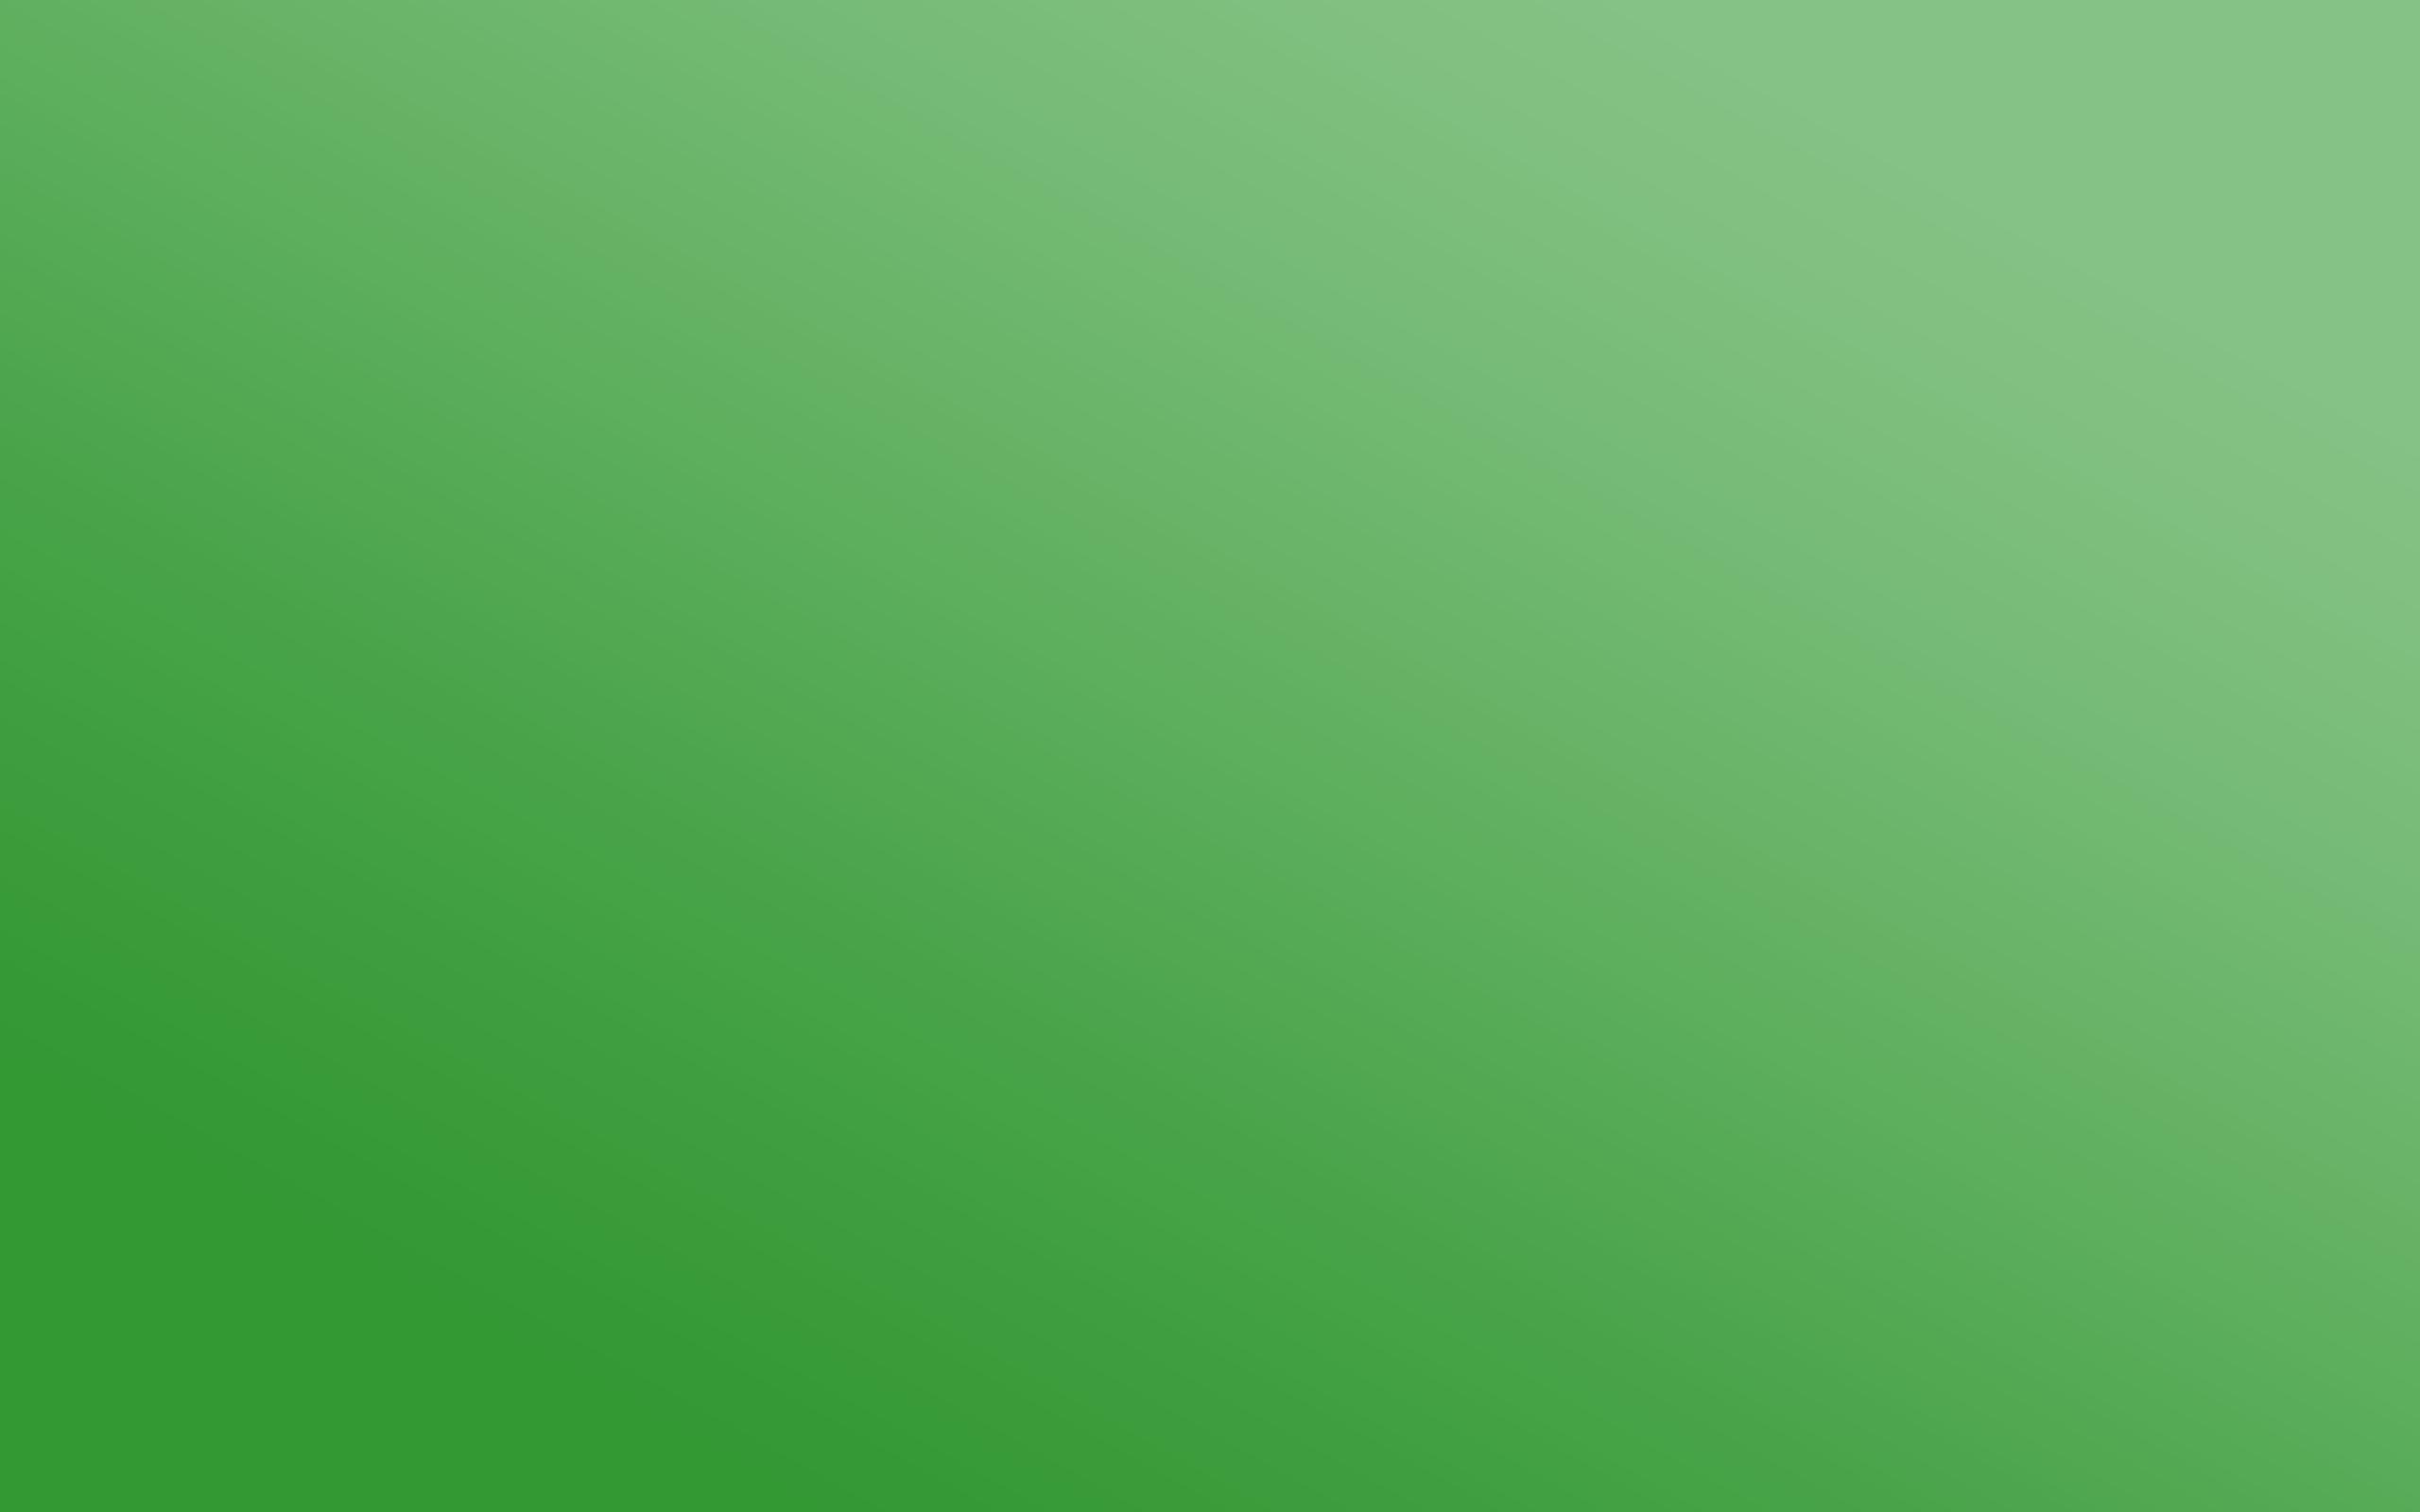 The Plain Color Green HD Wallpaper, Backgrounds Image